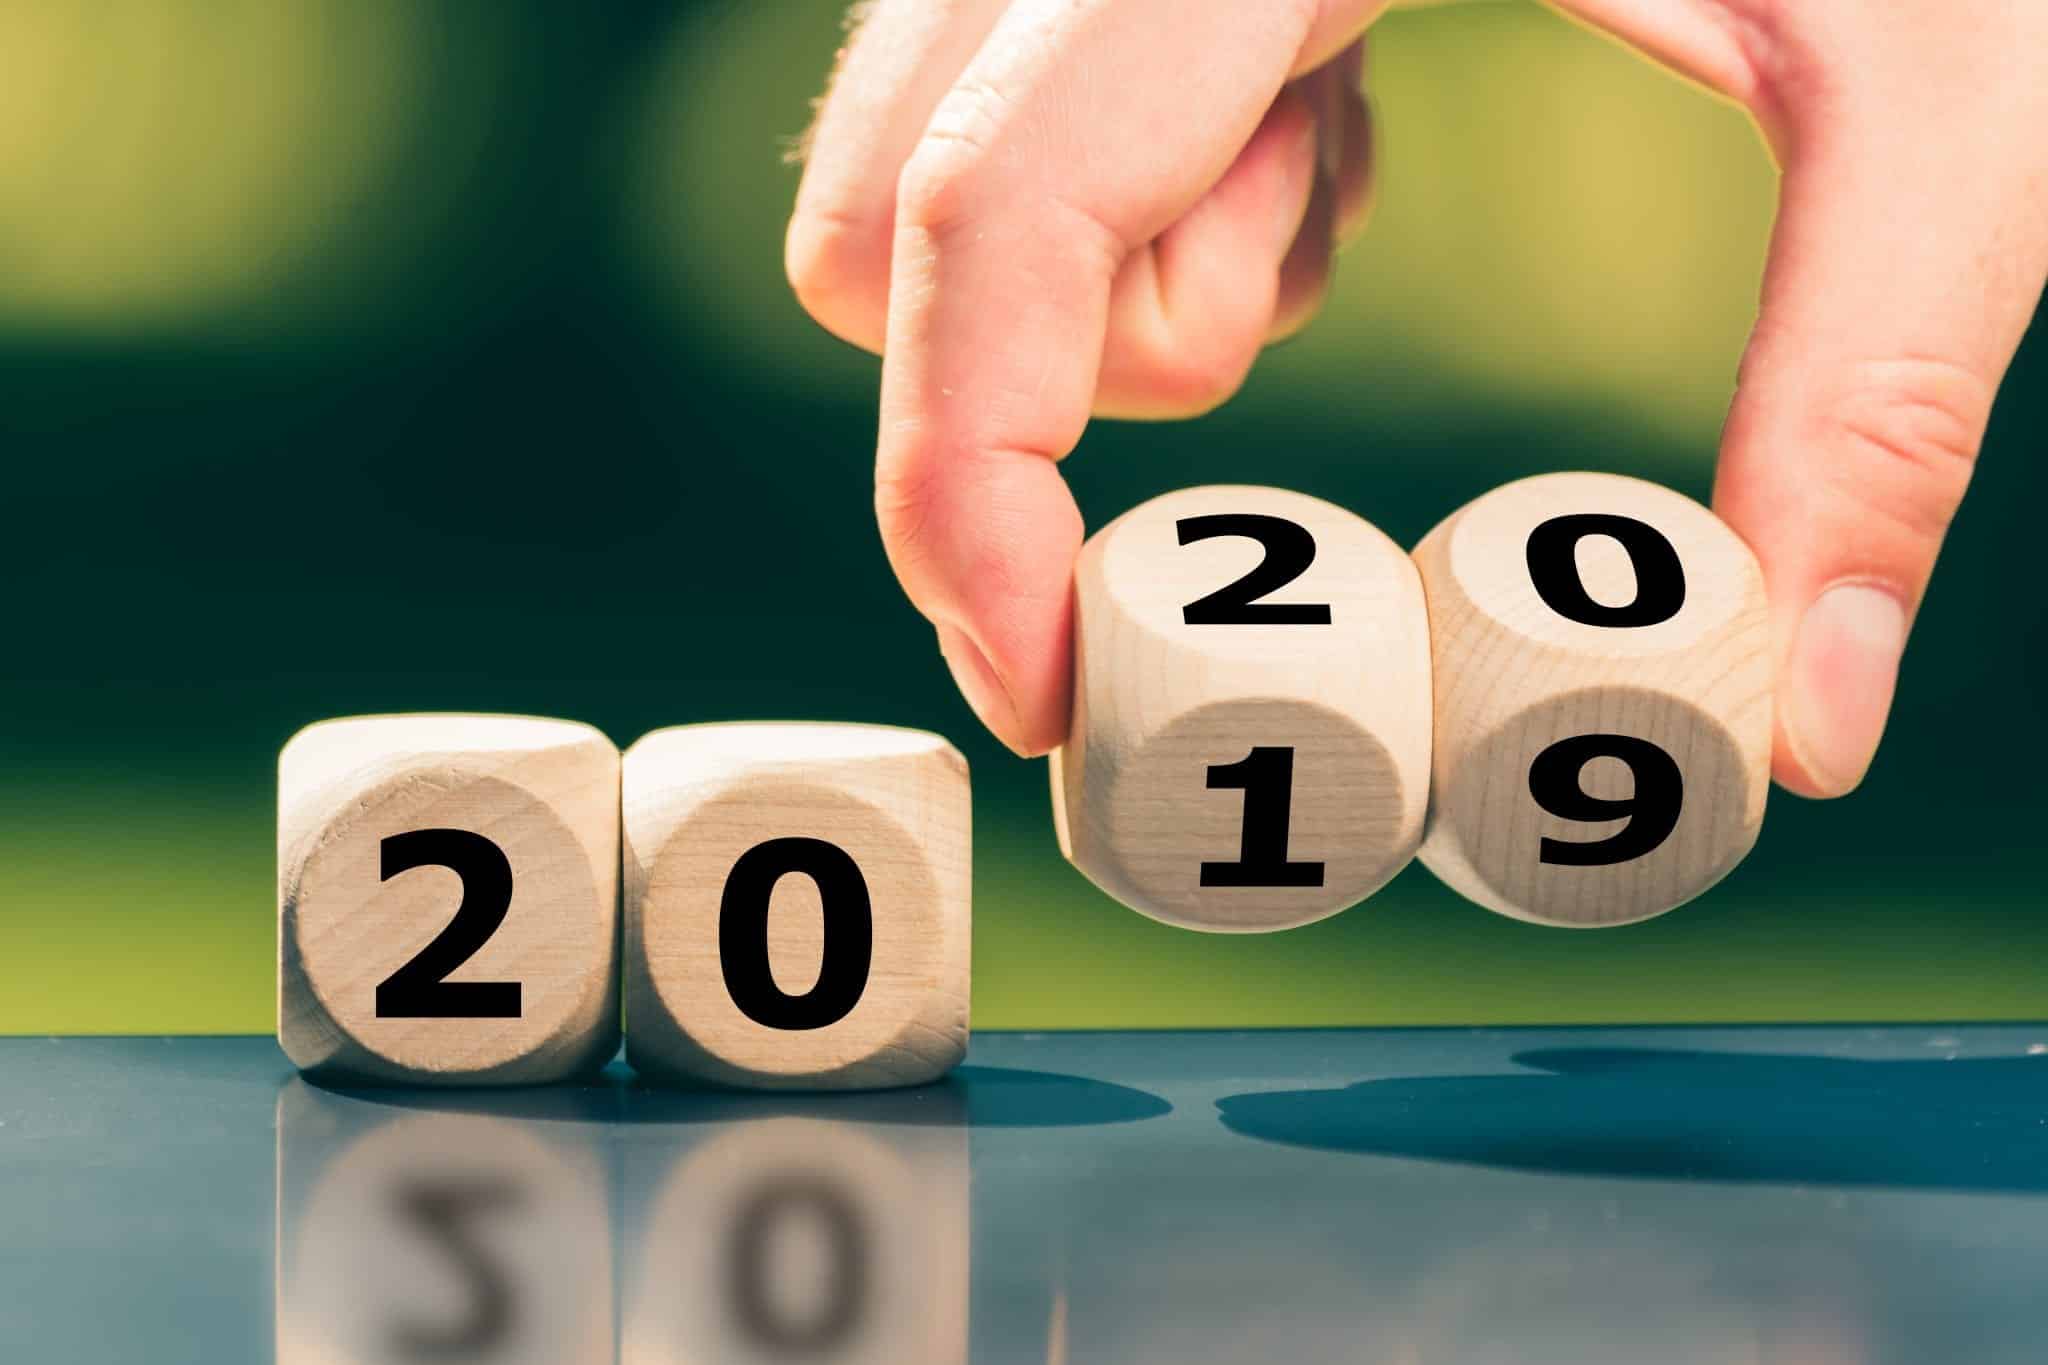 Dice symbolize the change to the new year 2020